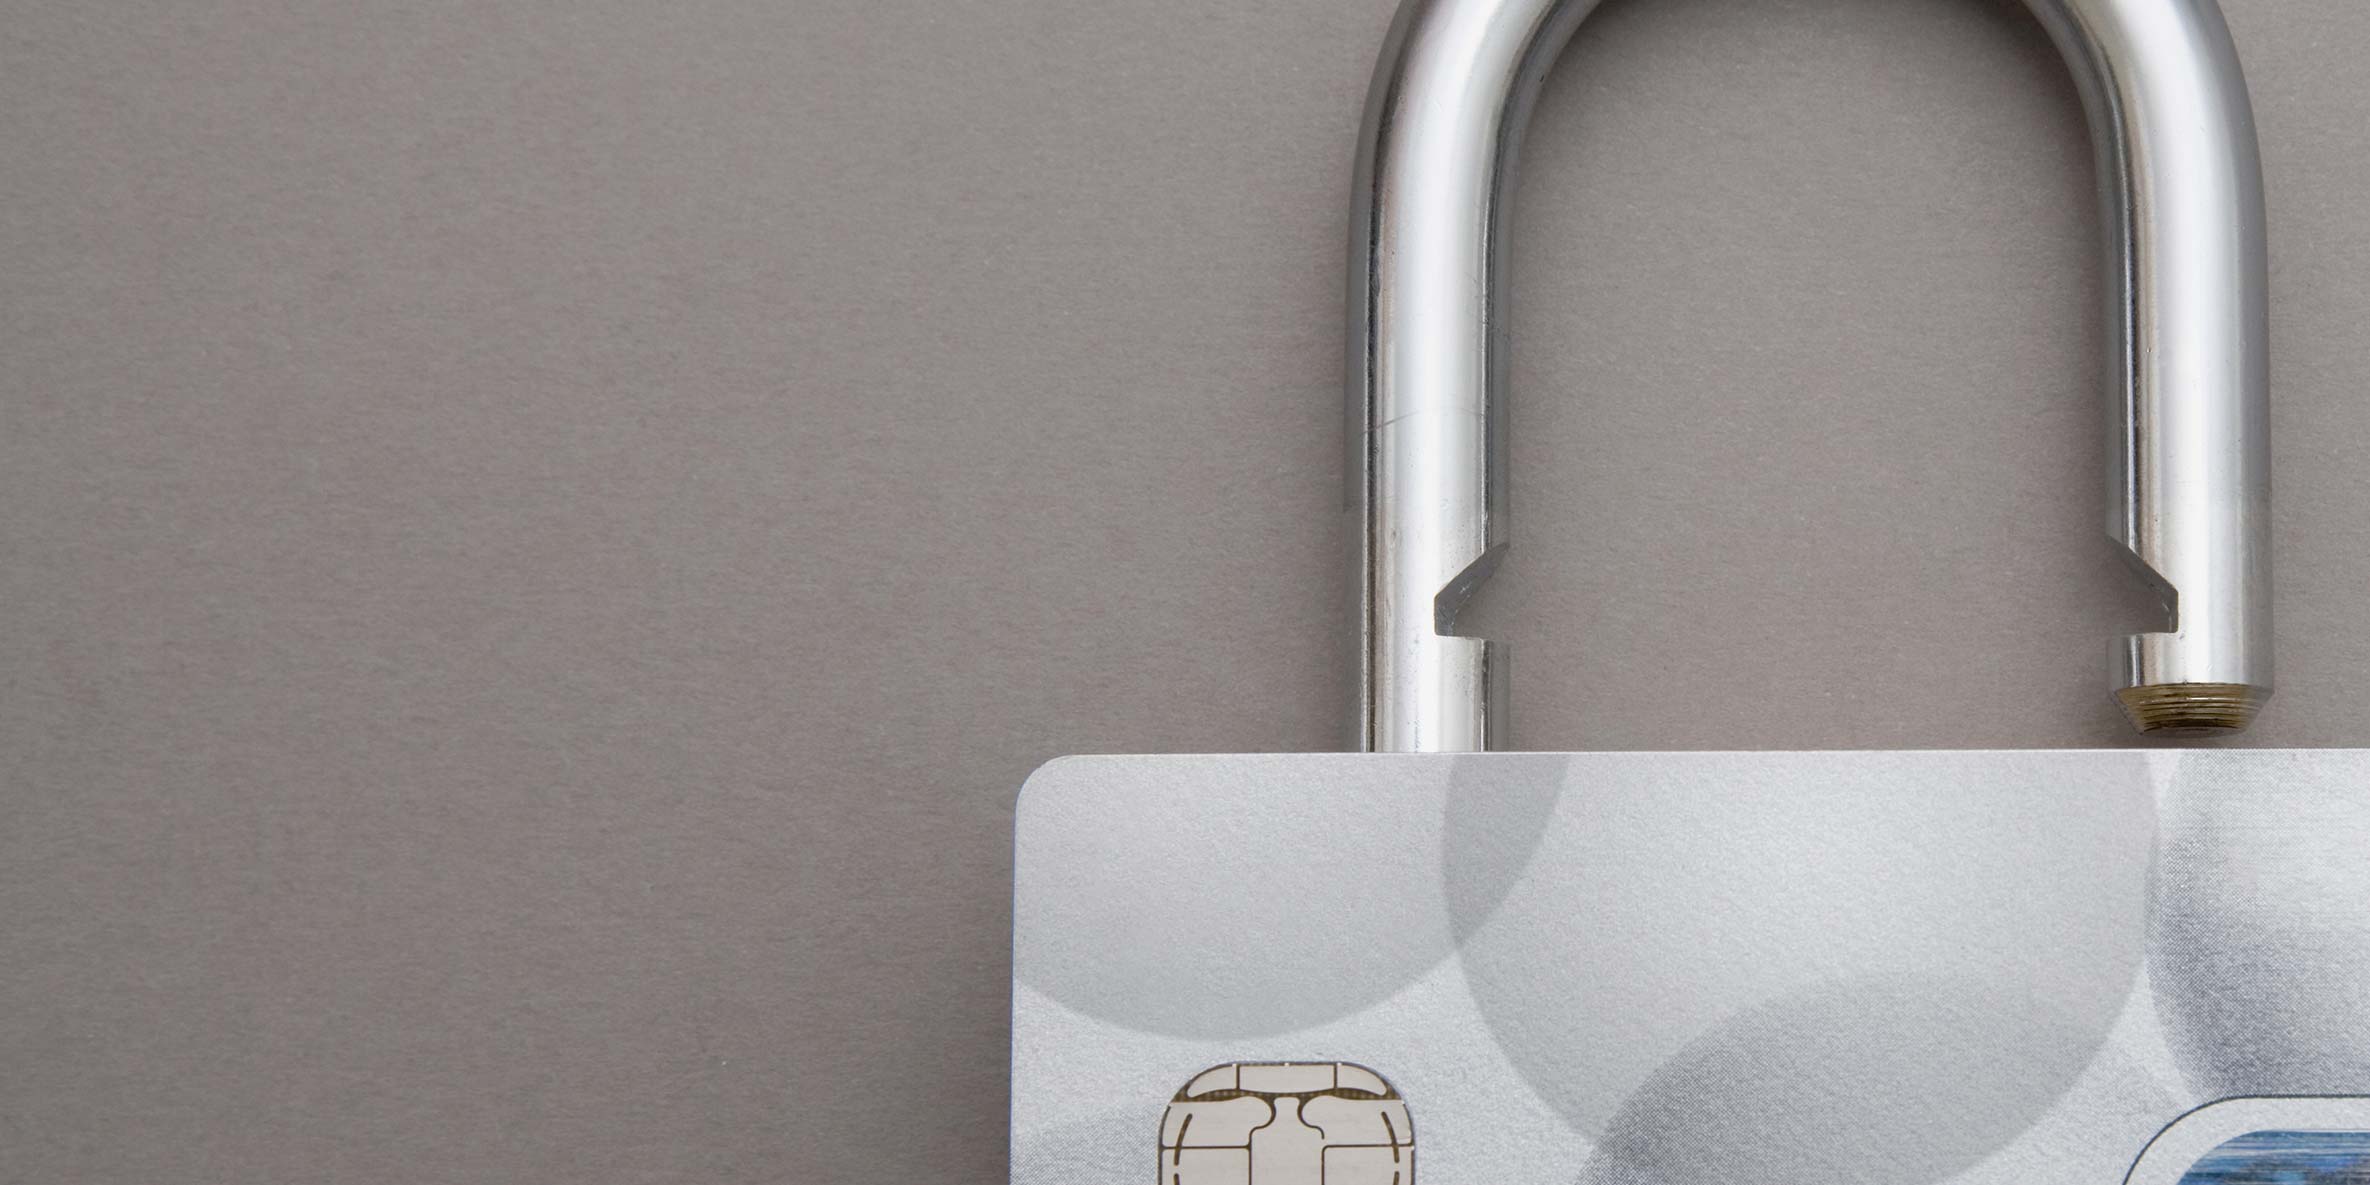 PCI Compliance: How to Secure Credit Card Information